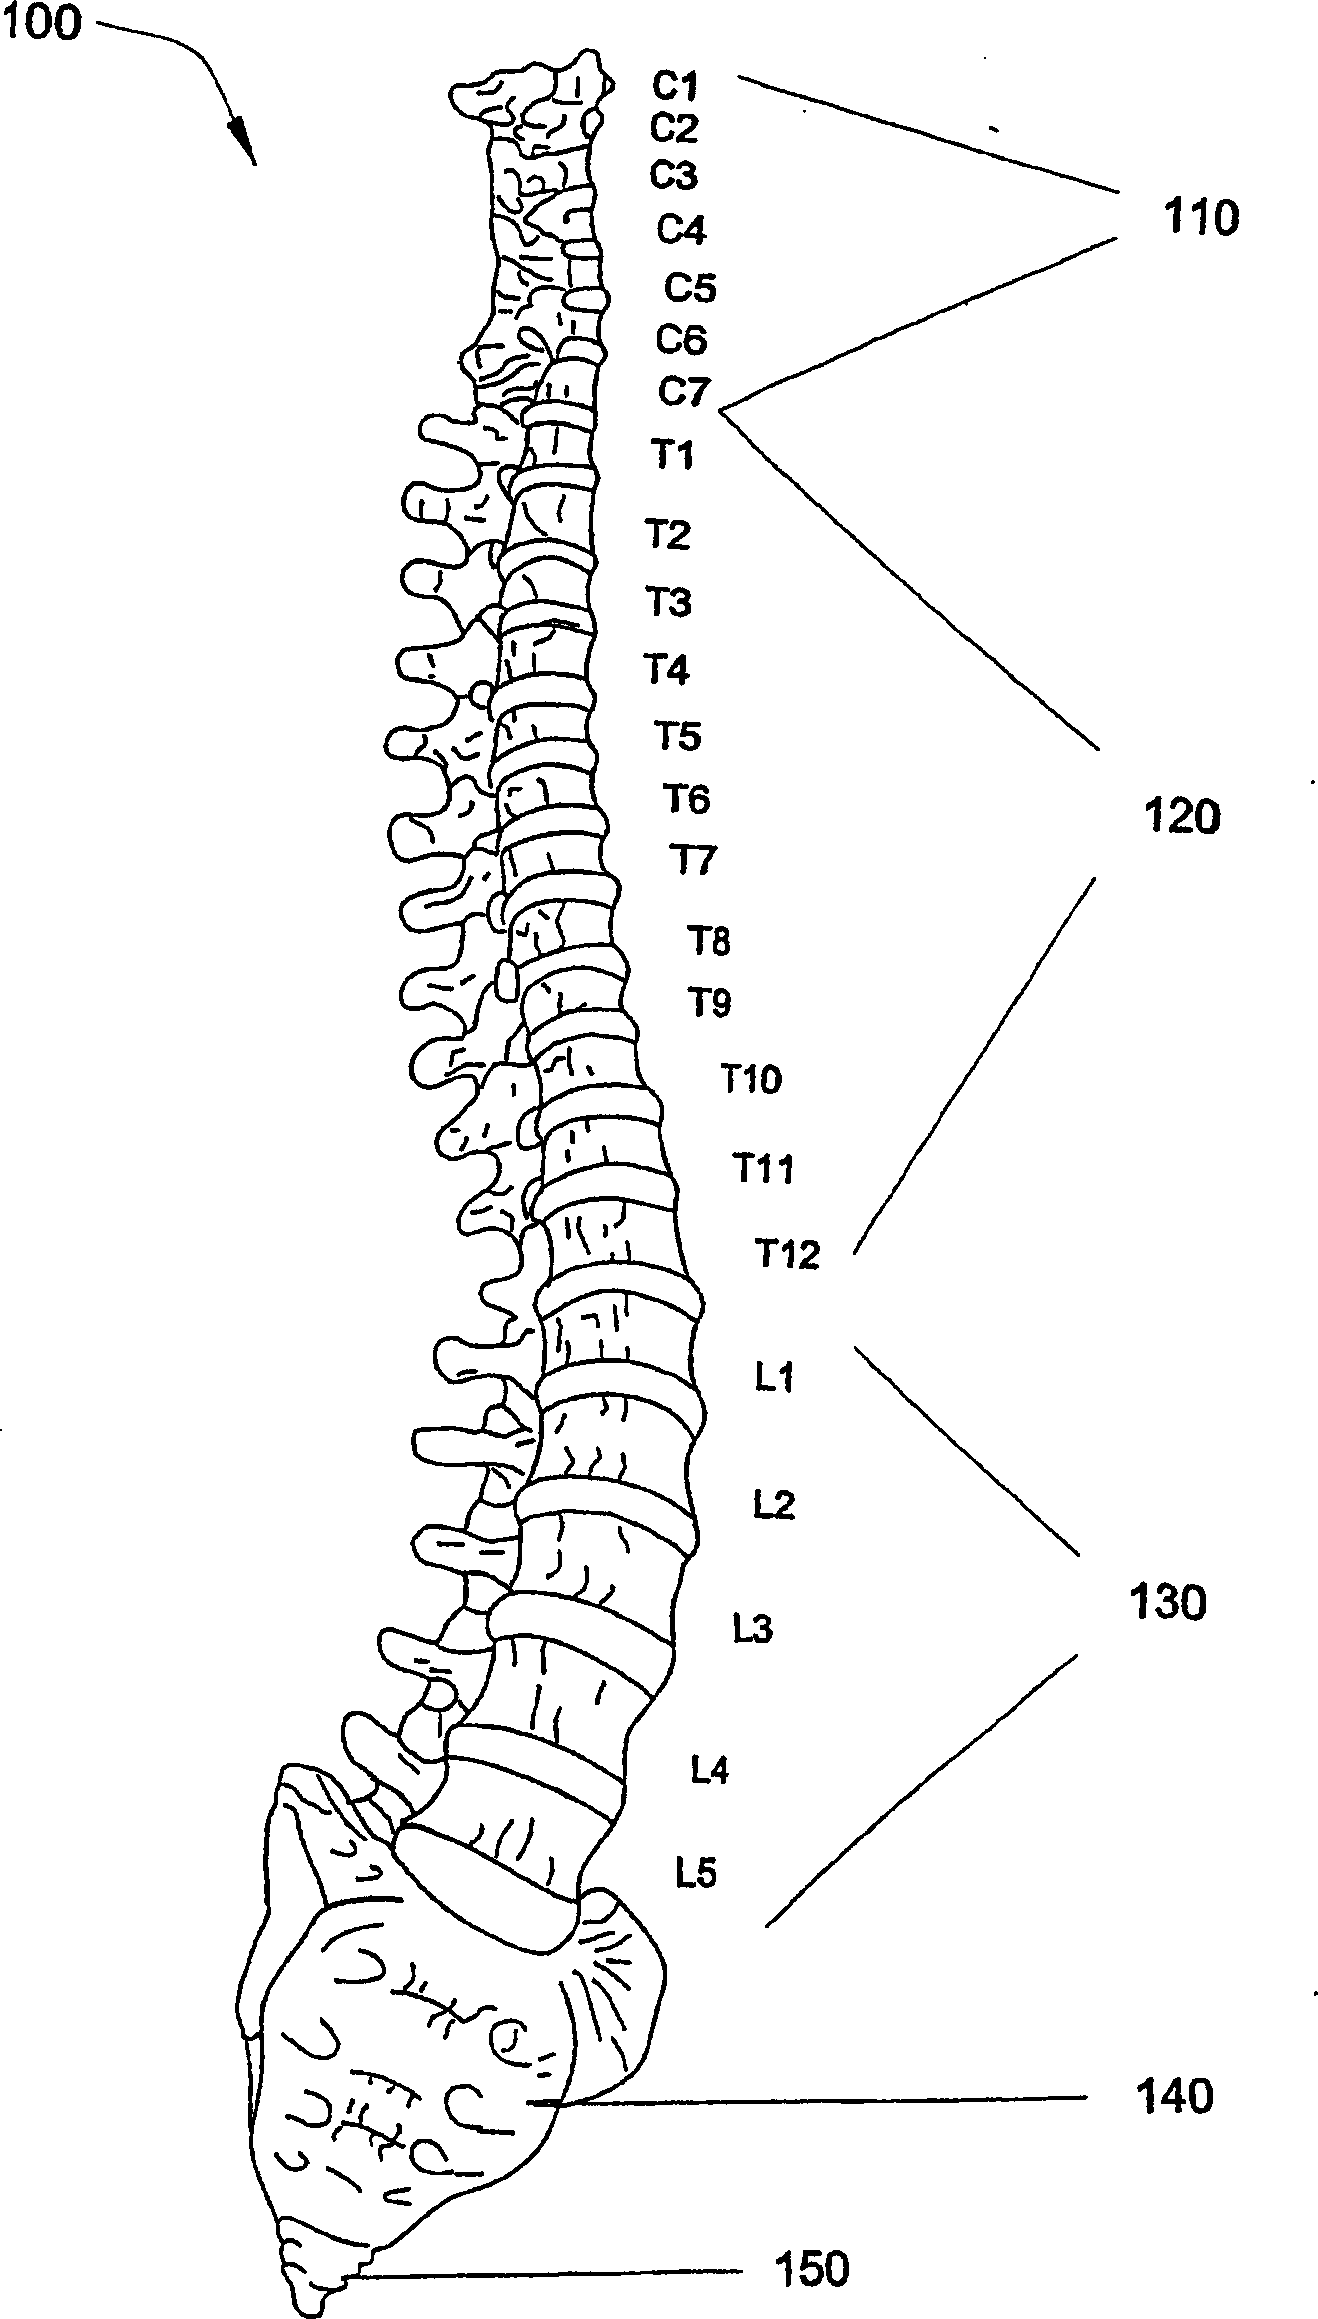 Laminoplasty devices and methods